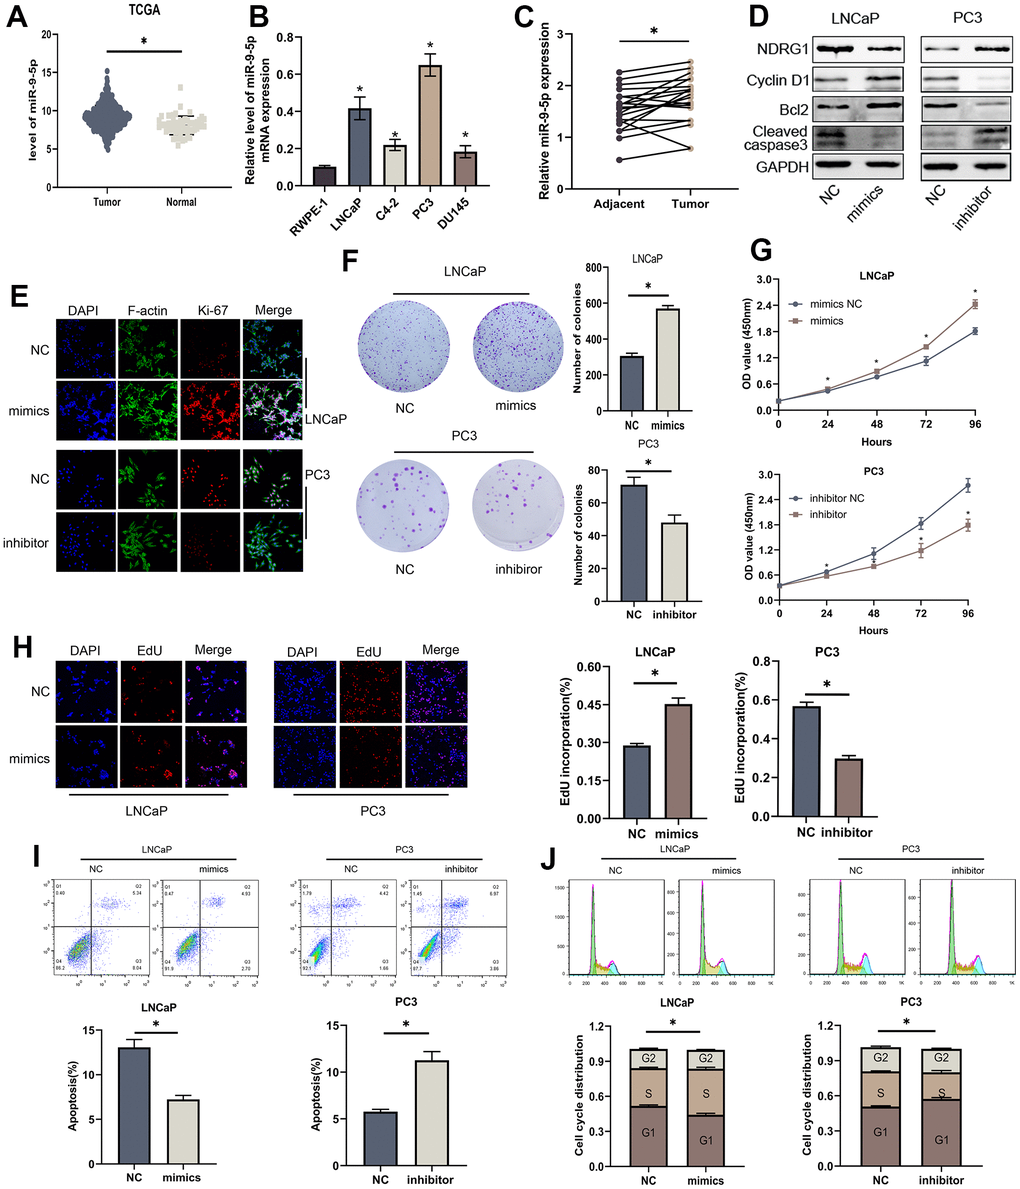 MiR-9-5p is also involved in proliferation and apoptosis of PCa cells. (A) The expression level of miR-9-5p was higher in PCa than in normal tissues in TCGA-PRAD. (B) The expression levels of miR-9-5p in four PCa cell lines (LNCaP, C4-2, PC3 and DU145) and normal cell line (RWPE-1). (C) The expression levels of miR-9-5p in 20 PCa tissues and paired normal tissues. (D) Western blot analysis revealed that the levels of cell apoptosis-related proteins (Bcl-2, cleaved-caspase3) and cell cycle-associated protein (Cyclin D1) were significantly altered after miR-9-5p regulated. (E) Immunofluorescence images of Ki-67 expression in LNCaP and PC3 cells with miR-9-5p downregulation or upregulation. Scale bar, 20μm. (F) Colony forming assay performed in LNCaP and PC3 cells to evaluate cell proliferation ability. (G, H) Cell viability of LNCaP and PC3 cells after knocking down or overexpressing lncMEG3 was determined using CCK8 assays. EdU assays also implicated the same results. (I, J) Cell cycle distribution and apoptosis were analysed by flow cytometry in LNCaP and PC3 cells, * P 